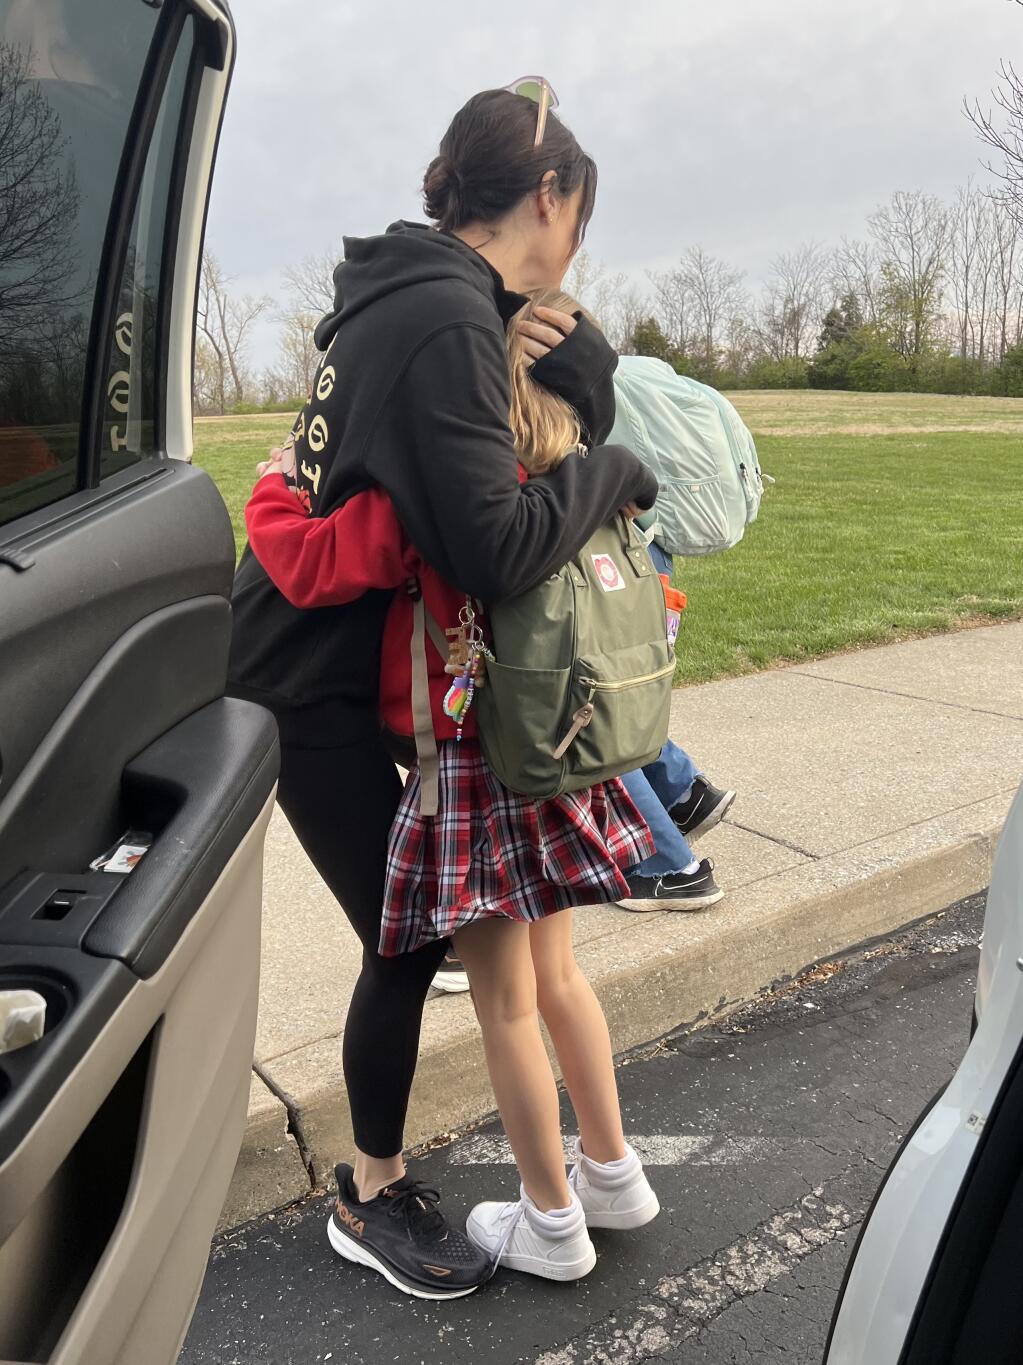 Kelly Dorrance hugged her niece one last time March 21 before dropping her off at The Covenant School in Nashville Tennessee the week before the mass shooting took place. (Kelly Dorrance)